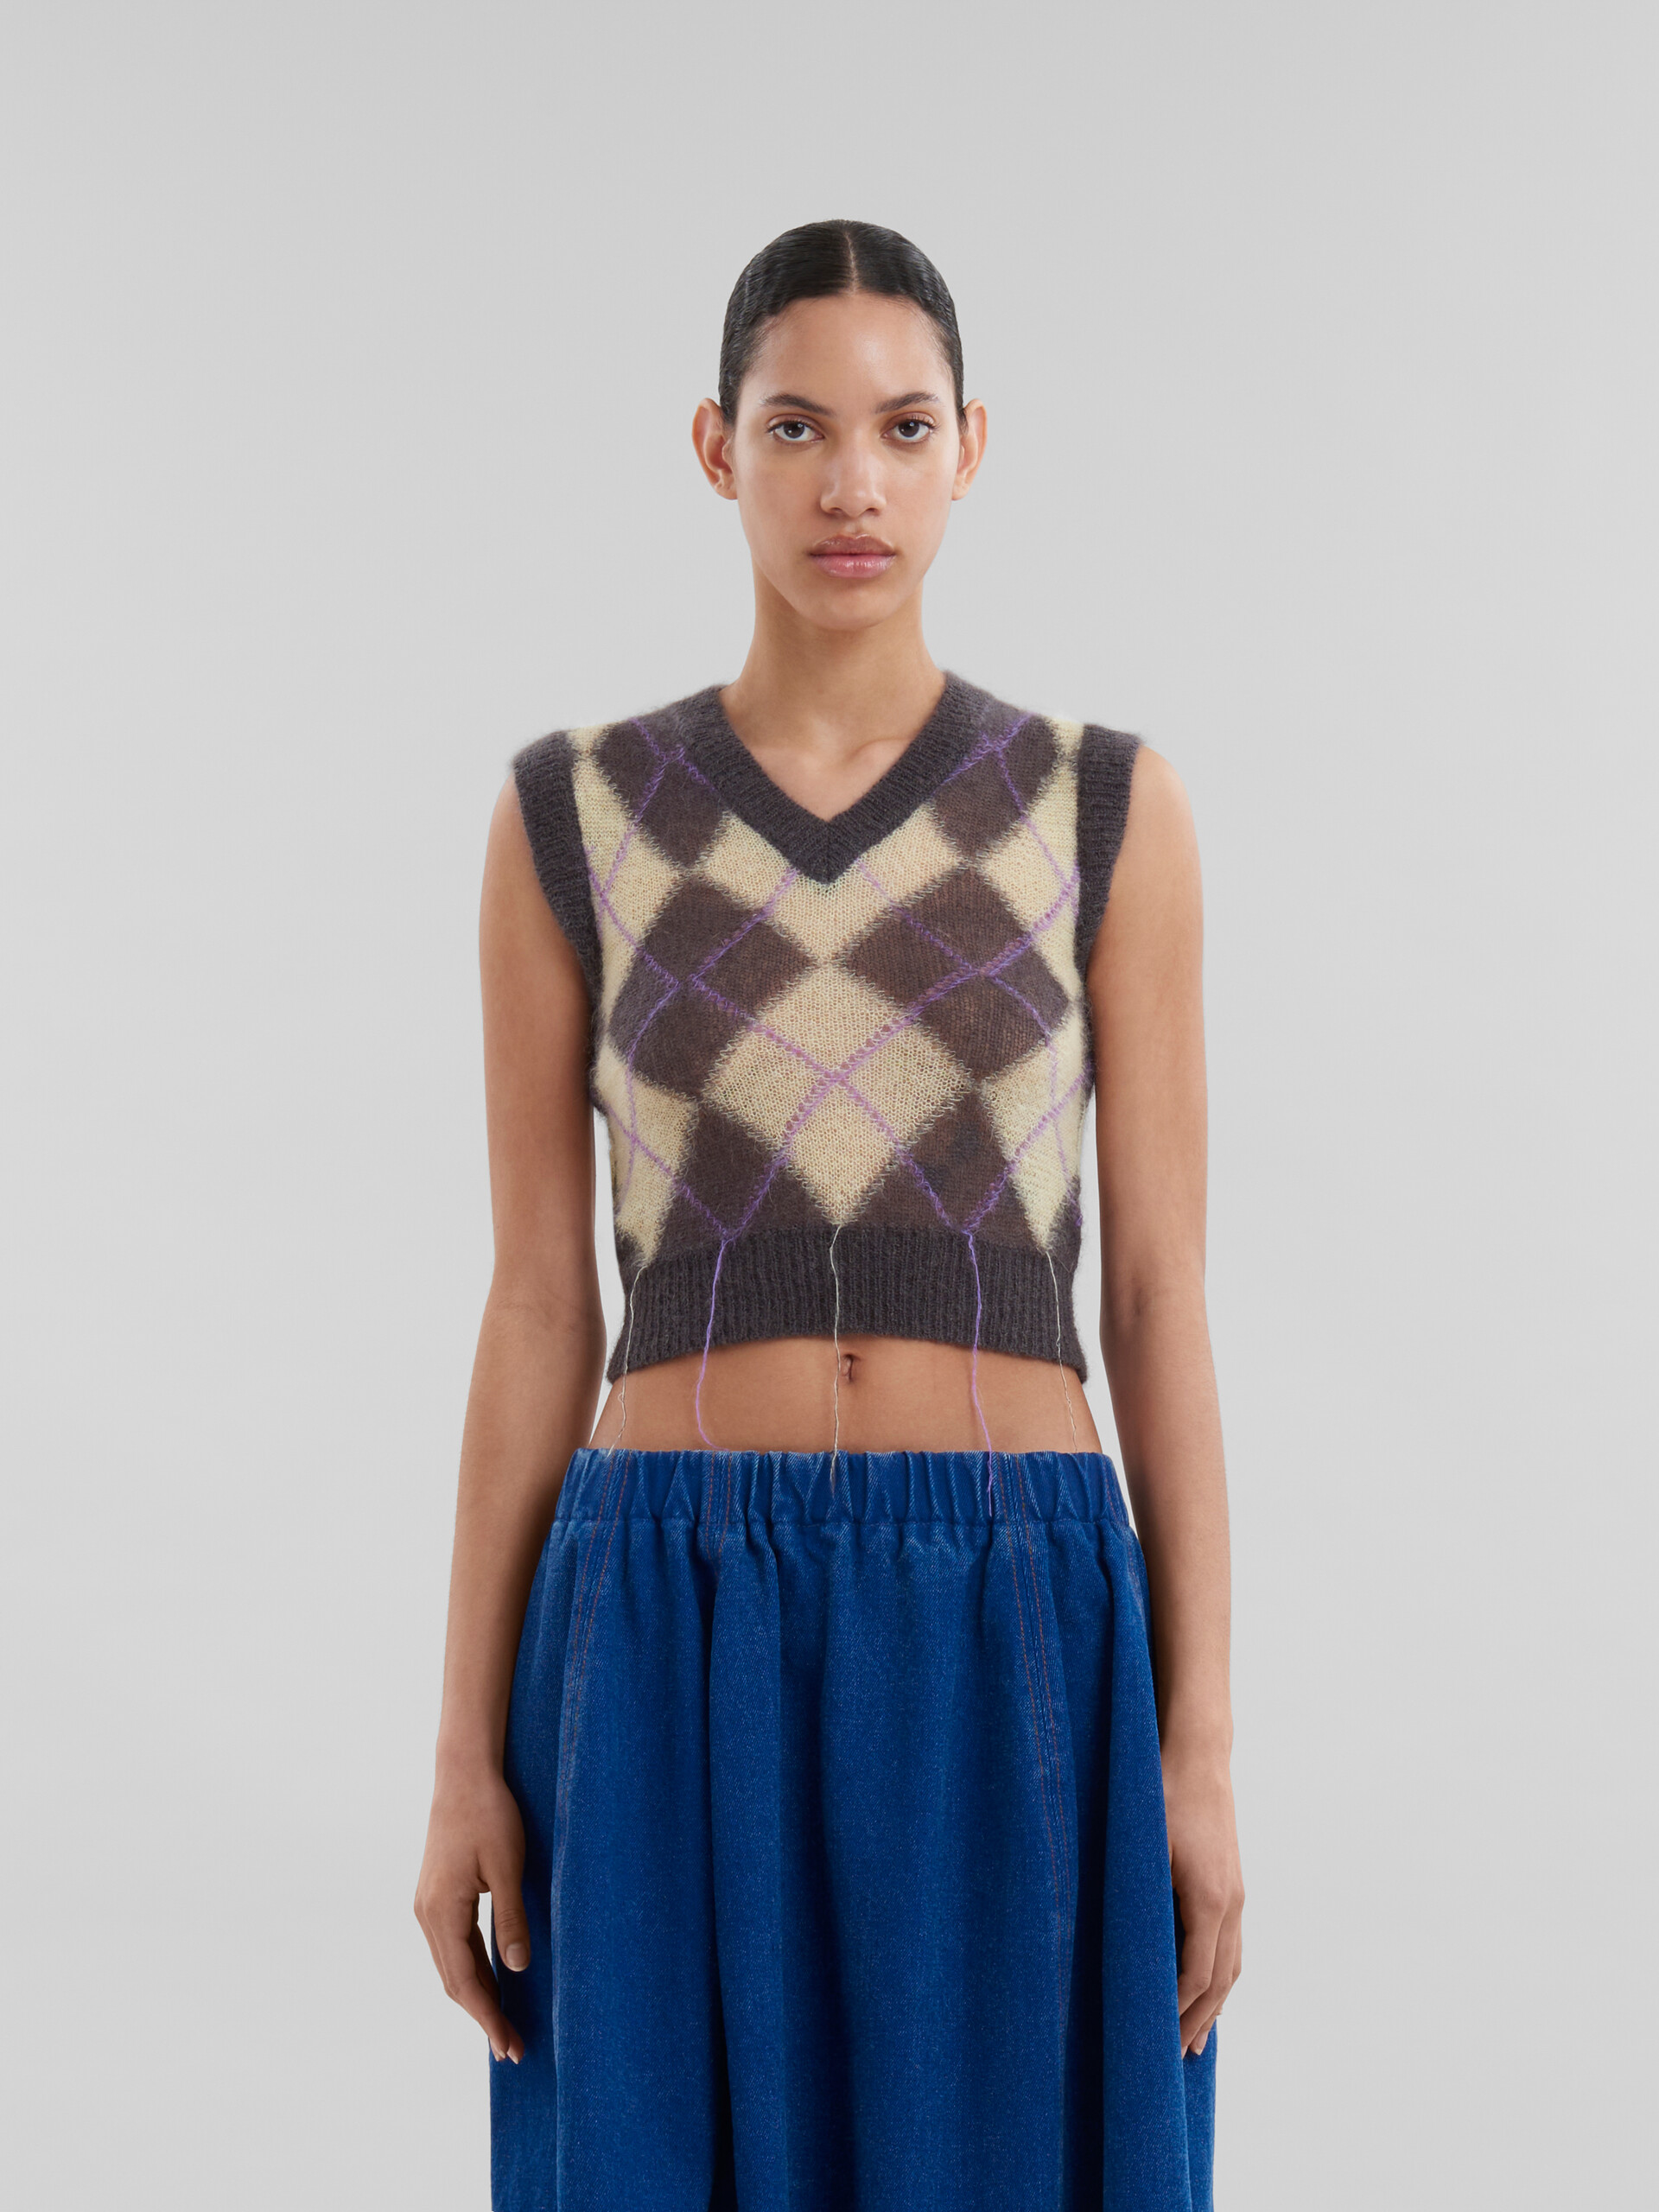 Grey mohair argyle vest with floating threads - Pullovers - Image 2